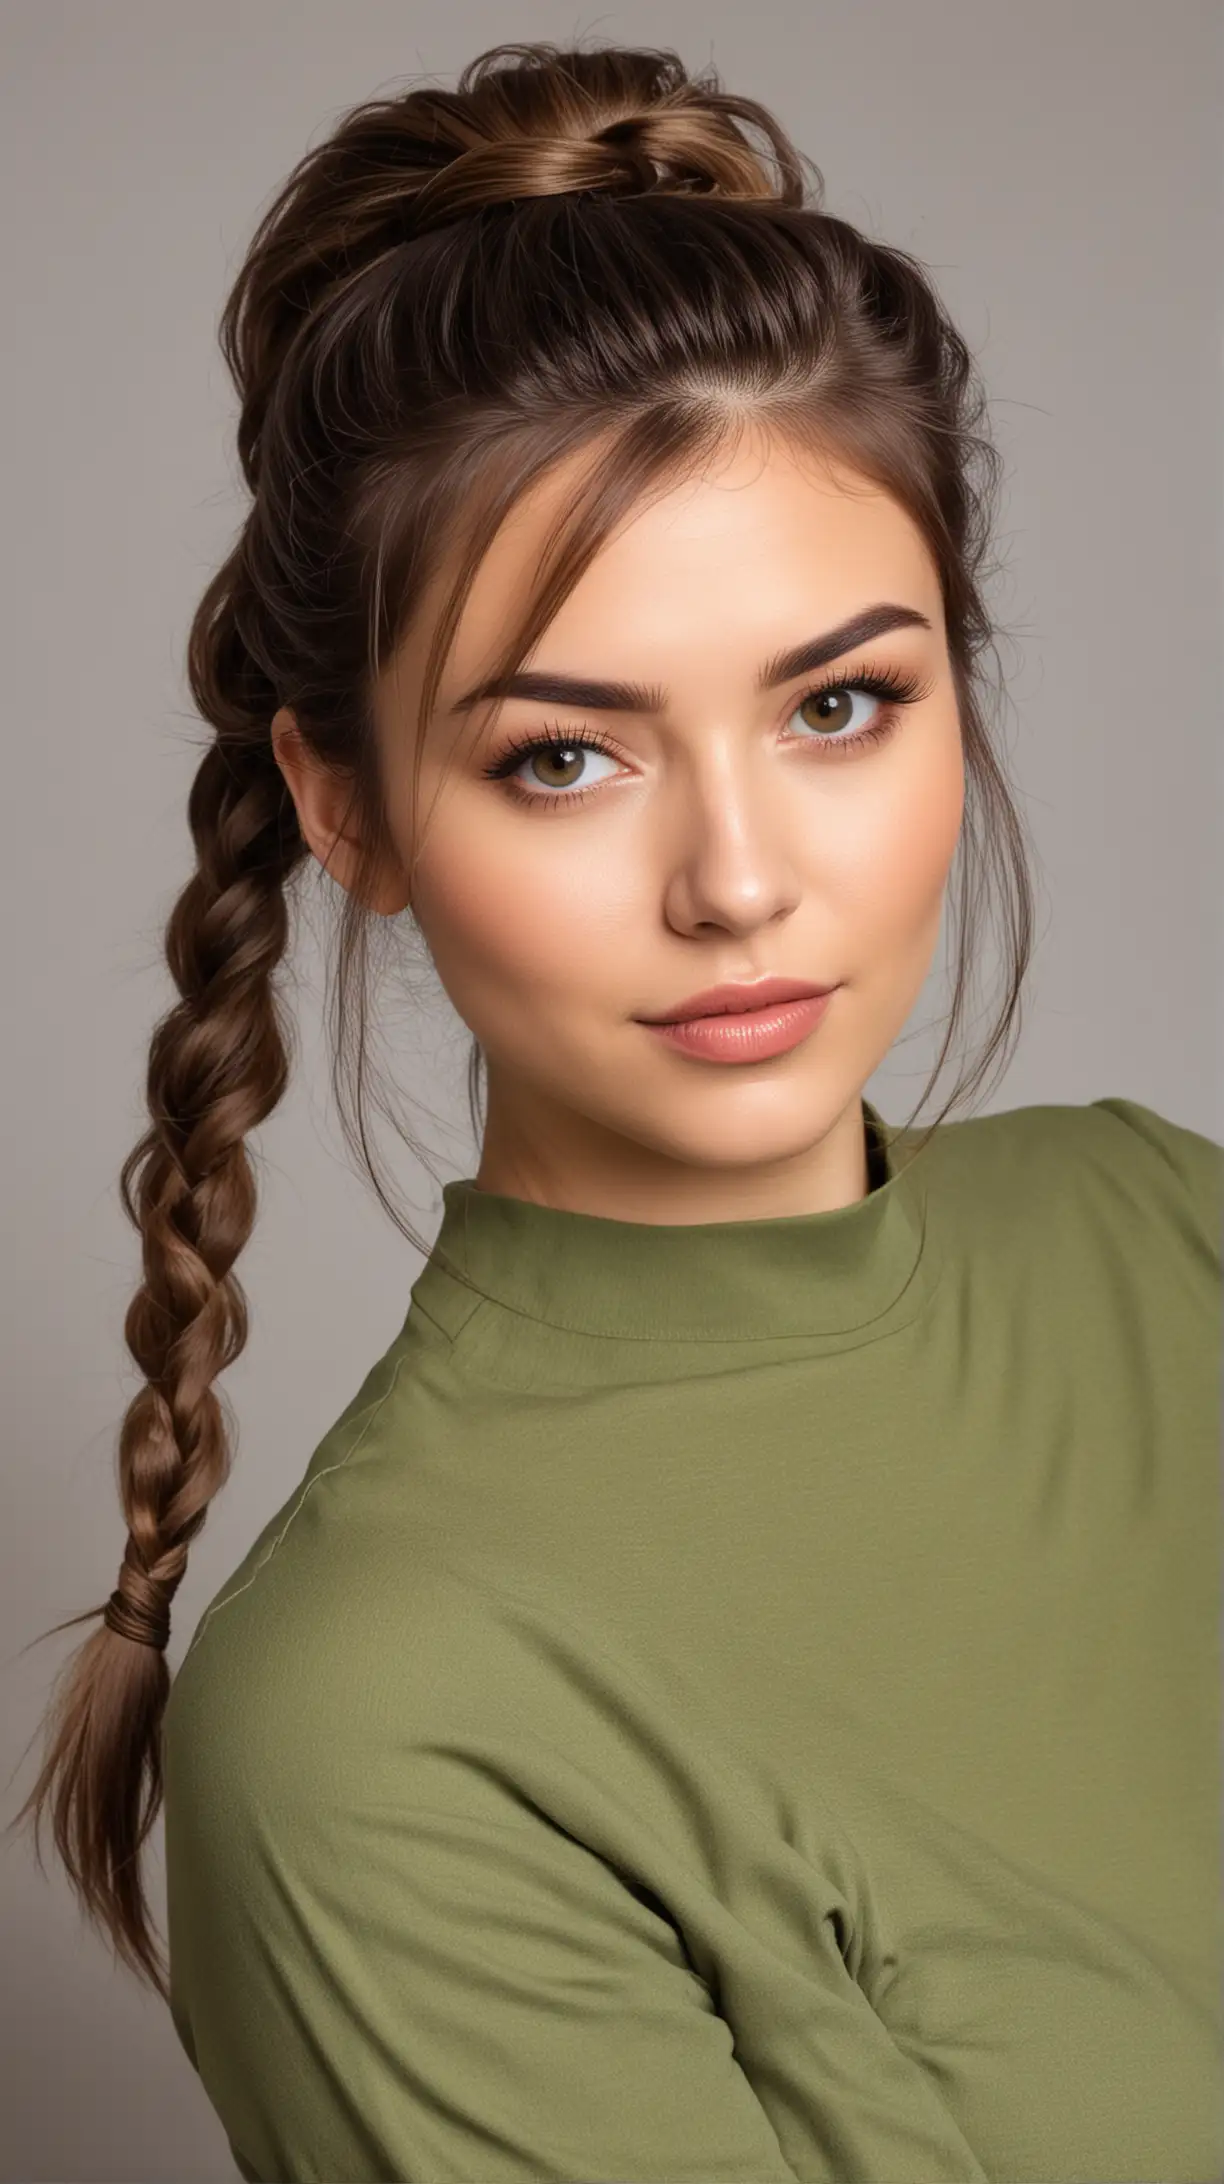  beautiful girl model, haircut - twisted ponytail with fishtail bangs, age 30 years old